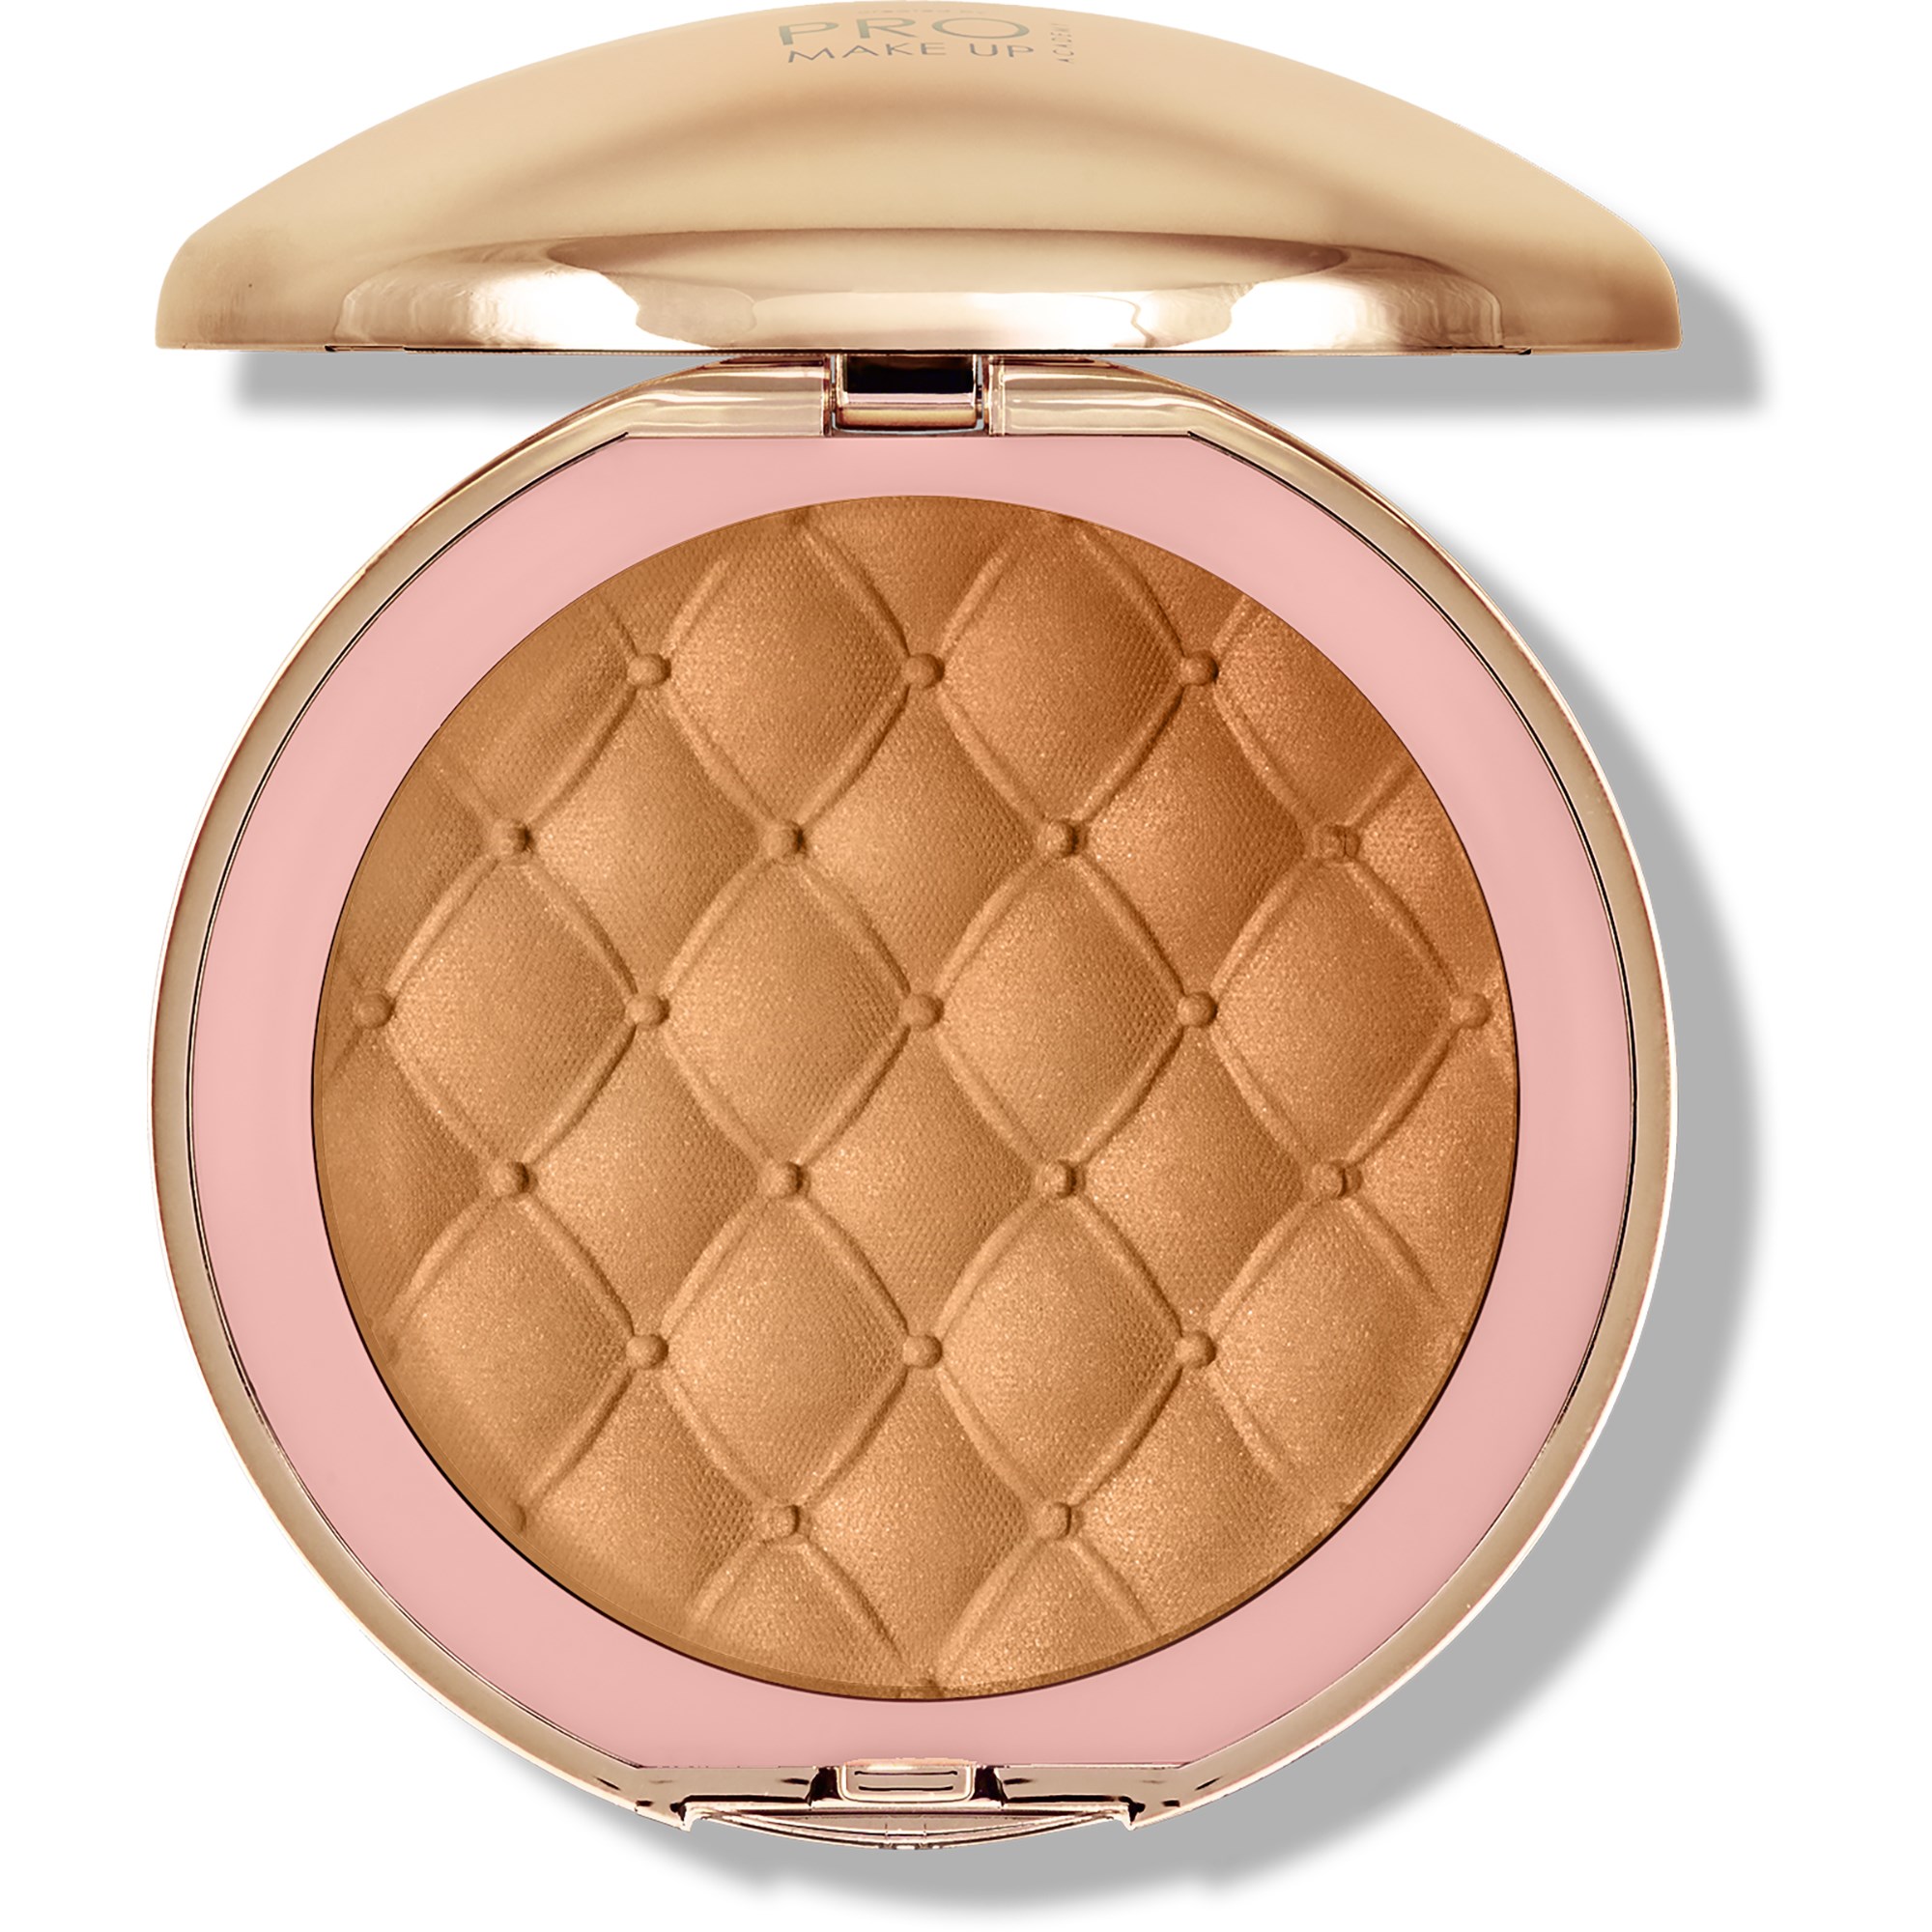 AFFECT Pro Make Up Charming Glow Pressed Powder Mysterious Glow